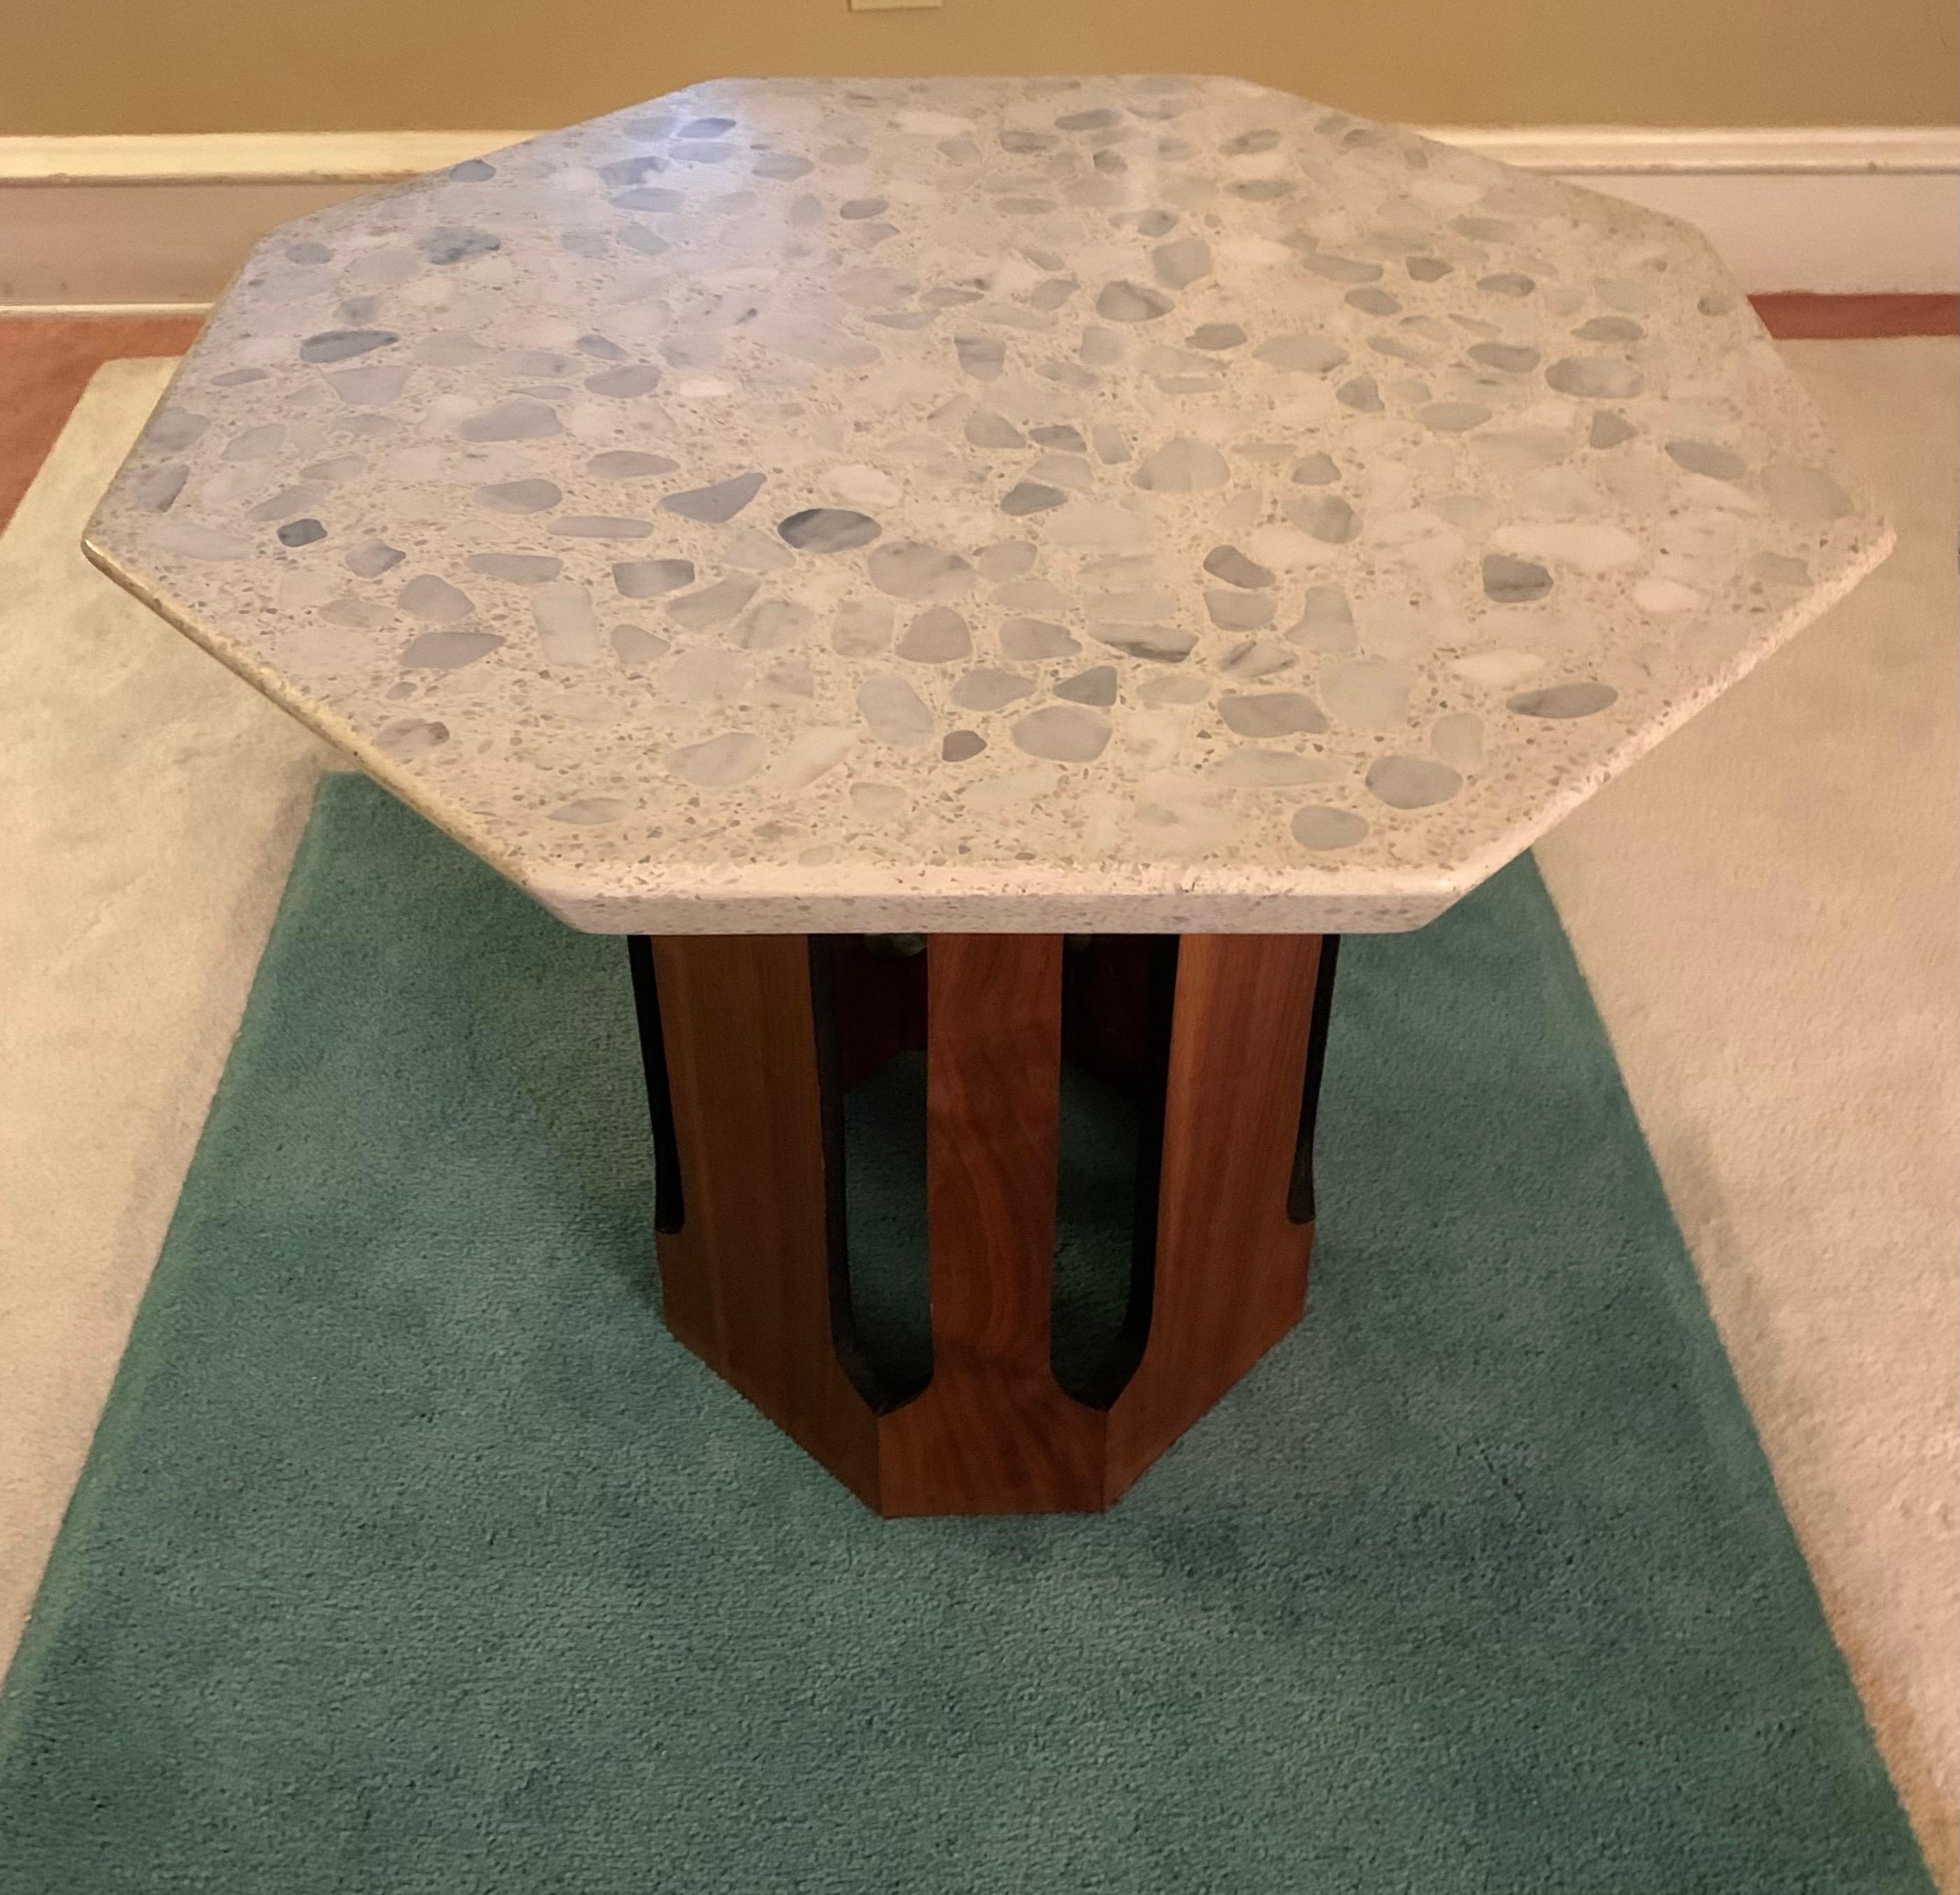 Wonderful occasional table designed by Probber in the late 50's. 

Thick gray terrazzo stone octagonal top. 

Weighty little table, but still lightweight enough to move around where needed.

Wood base has a traditional MCM vibe, but this table